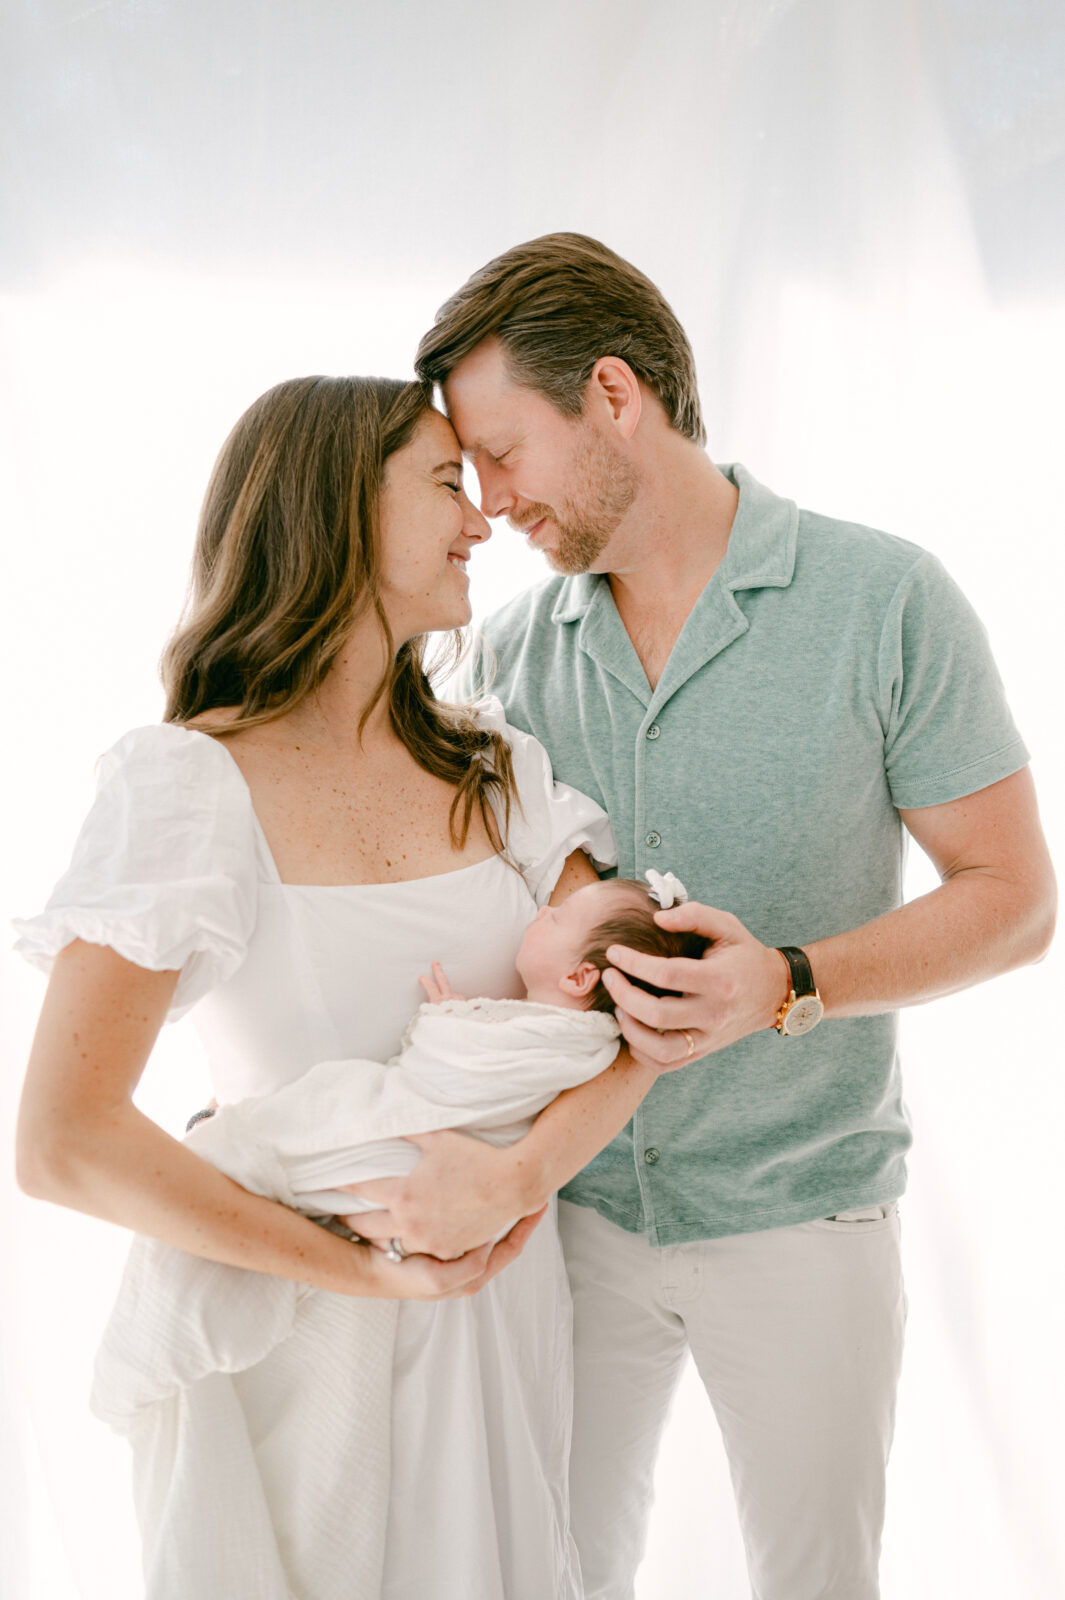 Best newborn photography experience in Miami